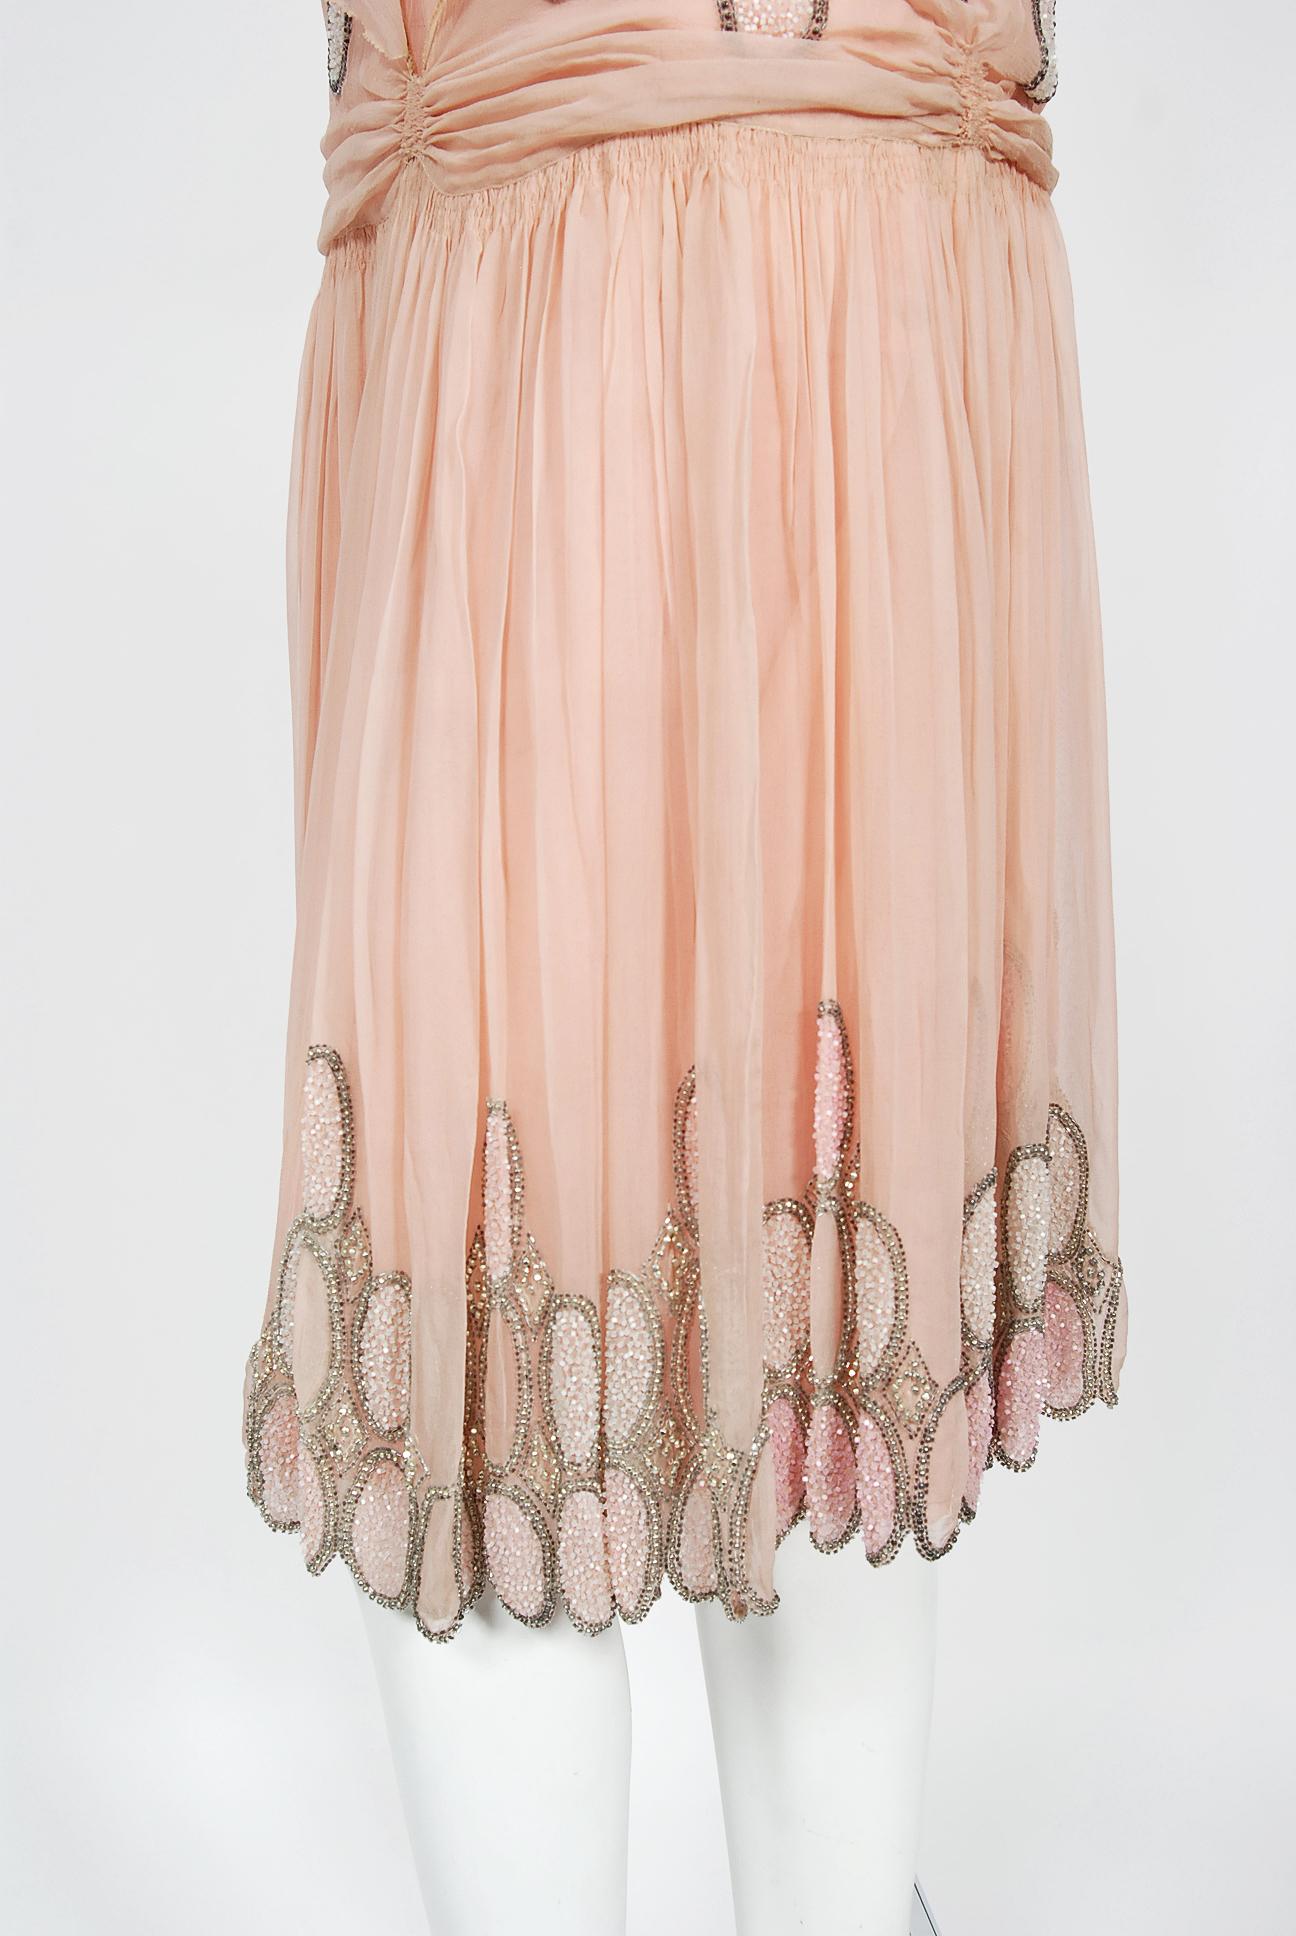 Vintage 1920's French Couture Pink Beaded Deco Dots Silk-Chiffon Flapper Dress For Sale 3